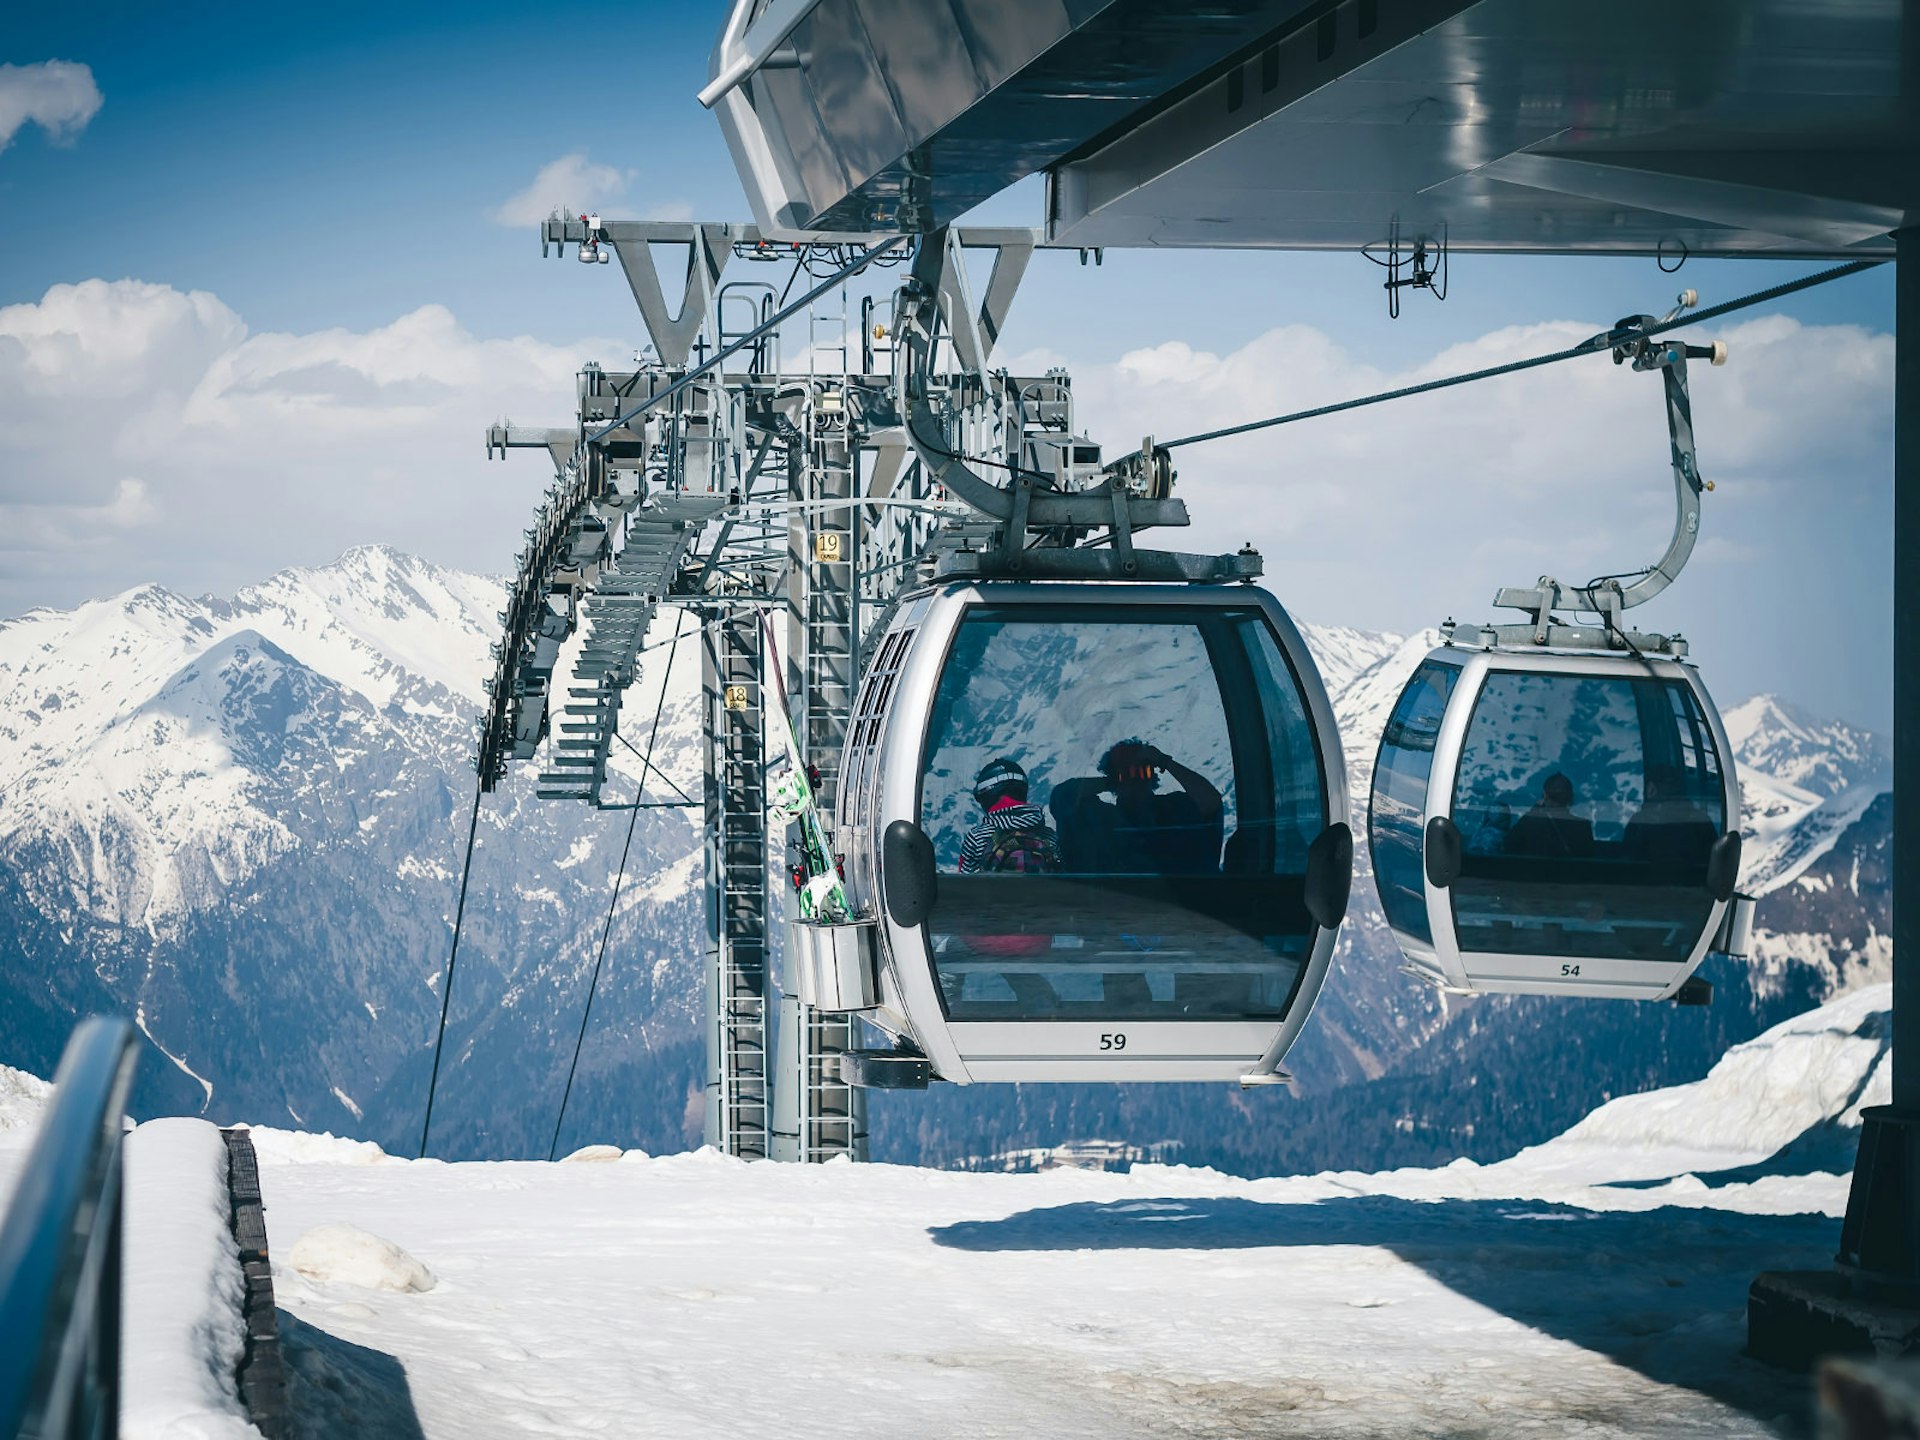 The cable car leading up to the top of the Roza Khutor ski resort at Krasnaya Polyana © KvaS / Shutterstock